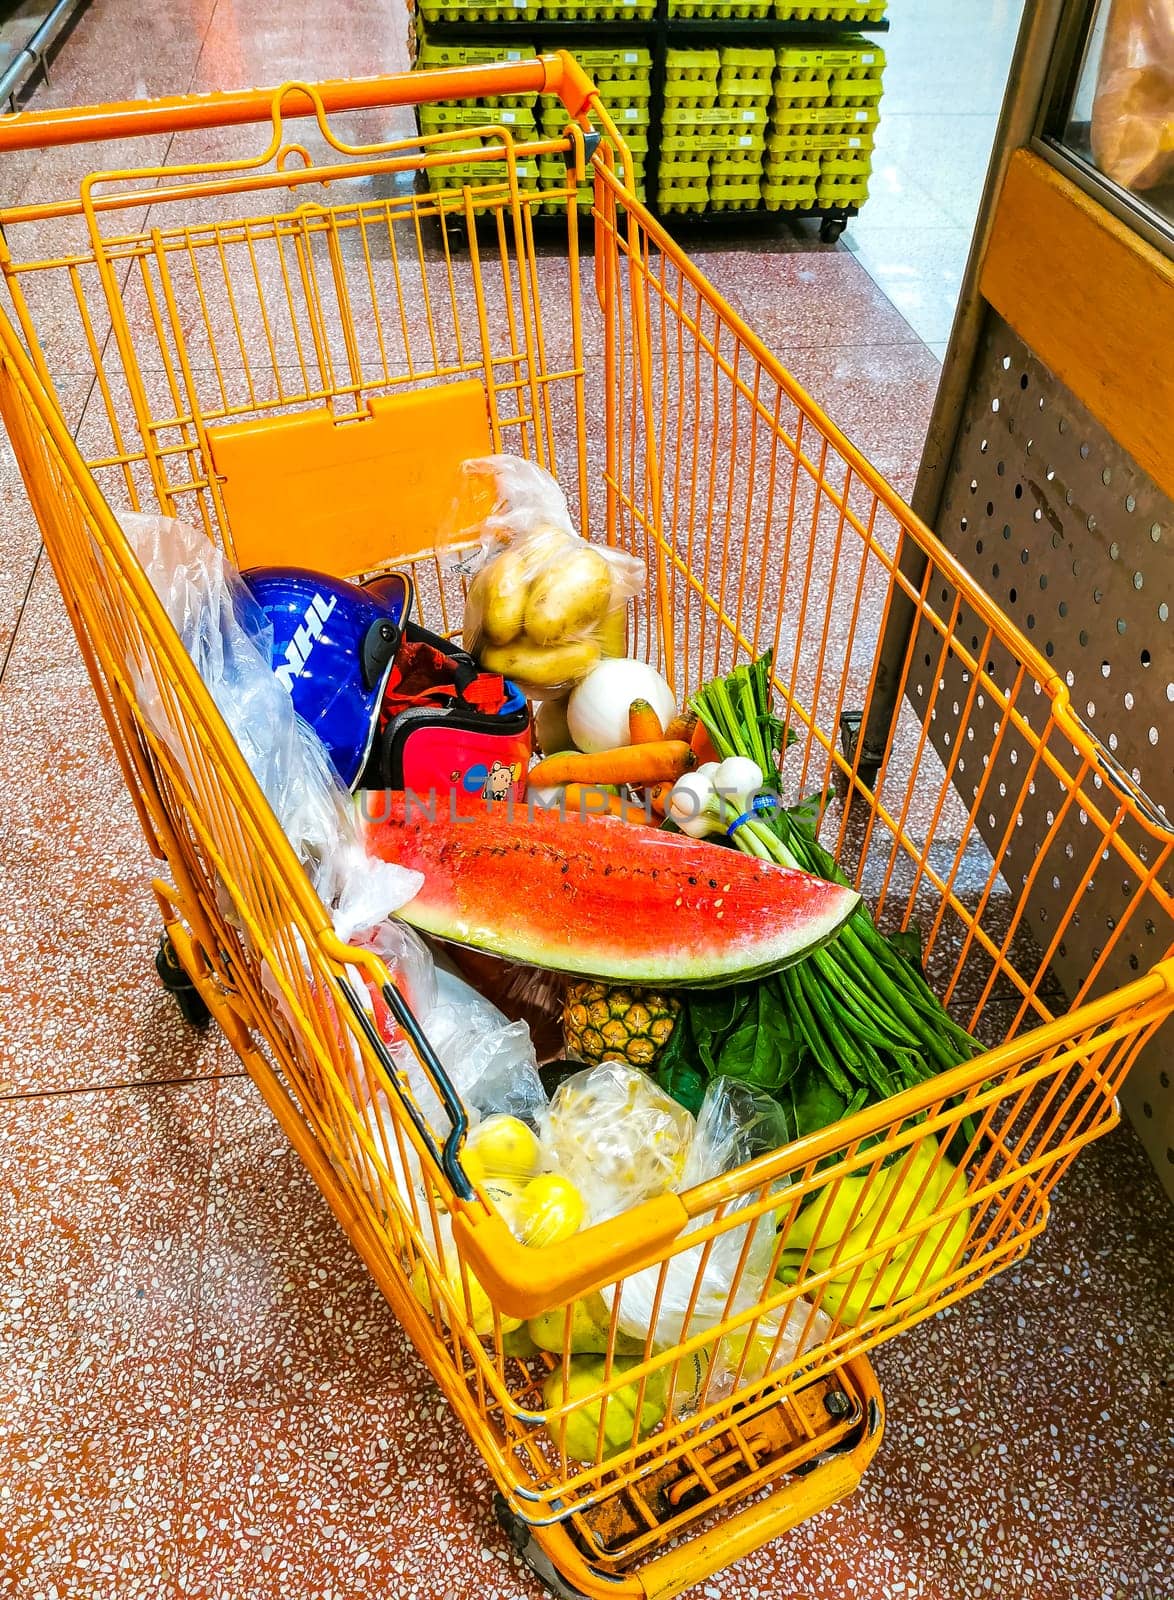 Supermarket from the inside Shelves Goods People Shopping carts Products. by Arkadij